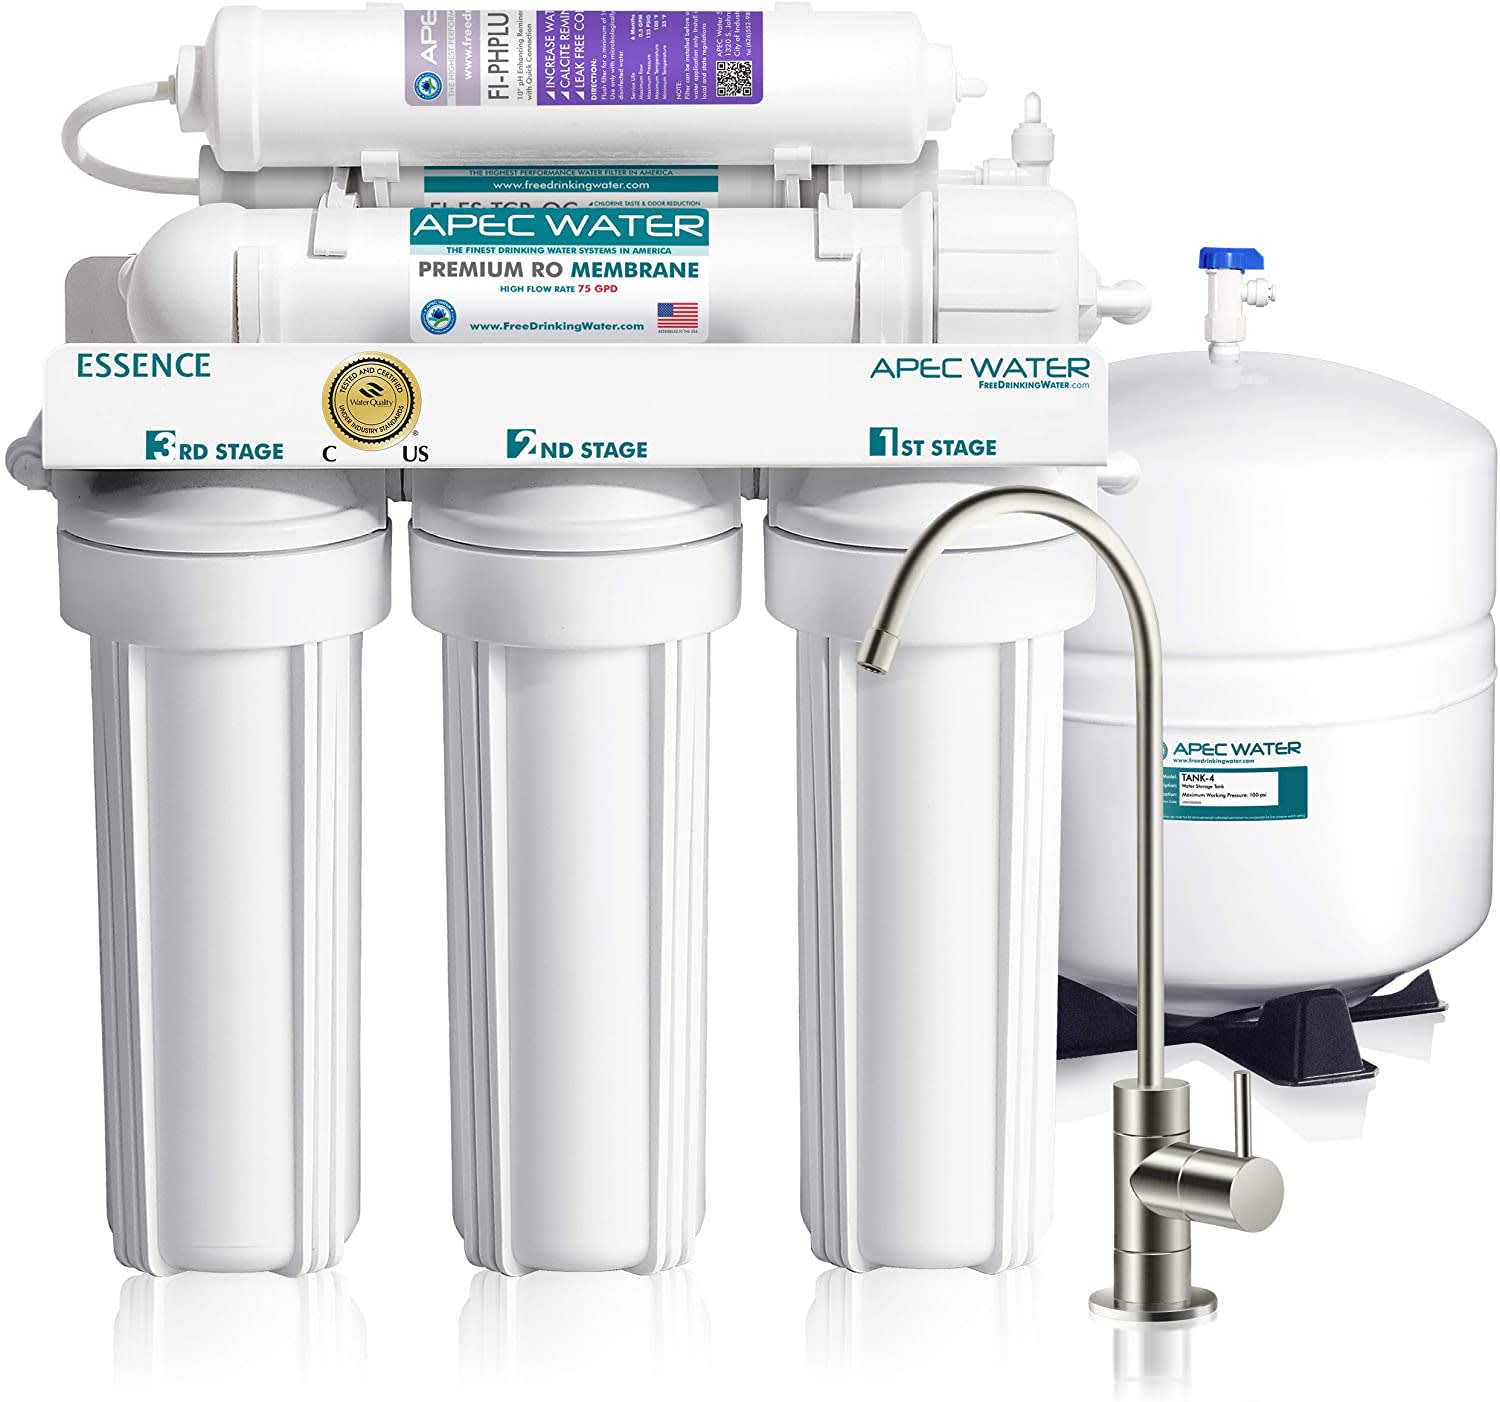 APEC Reverse Osmosis Drinking Water Filter System - Home System Pick